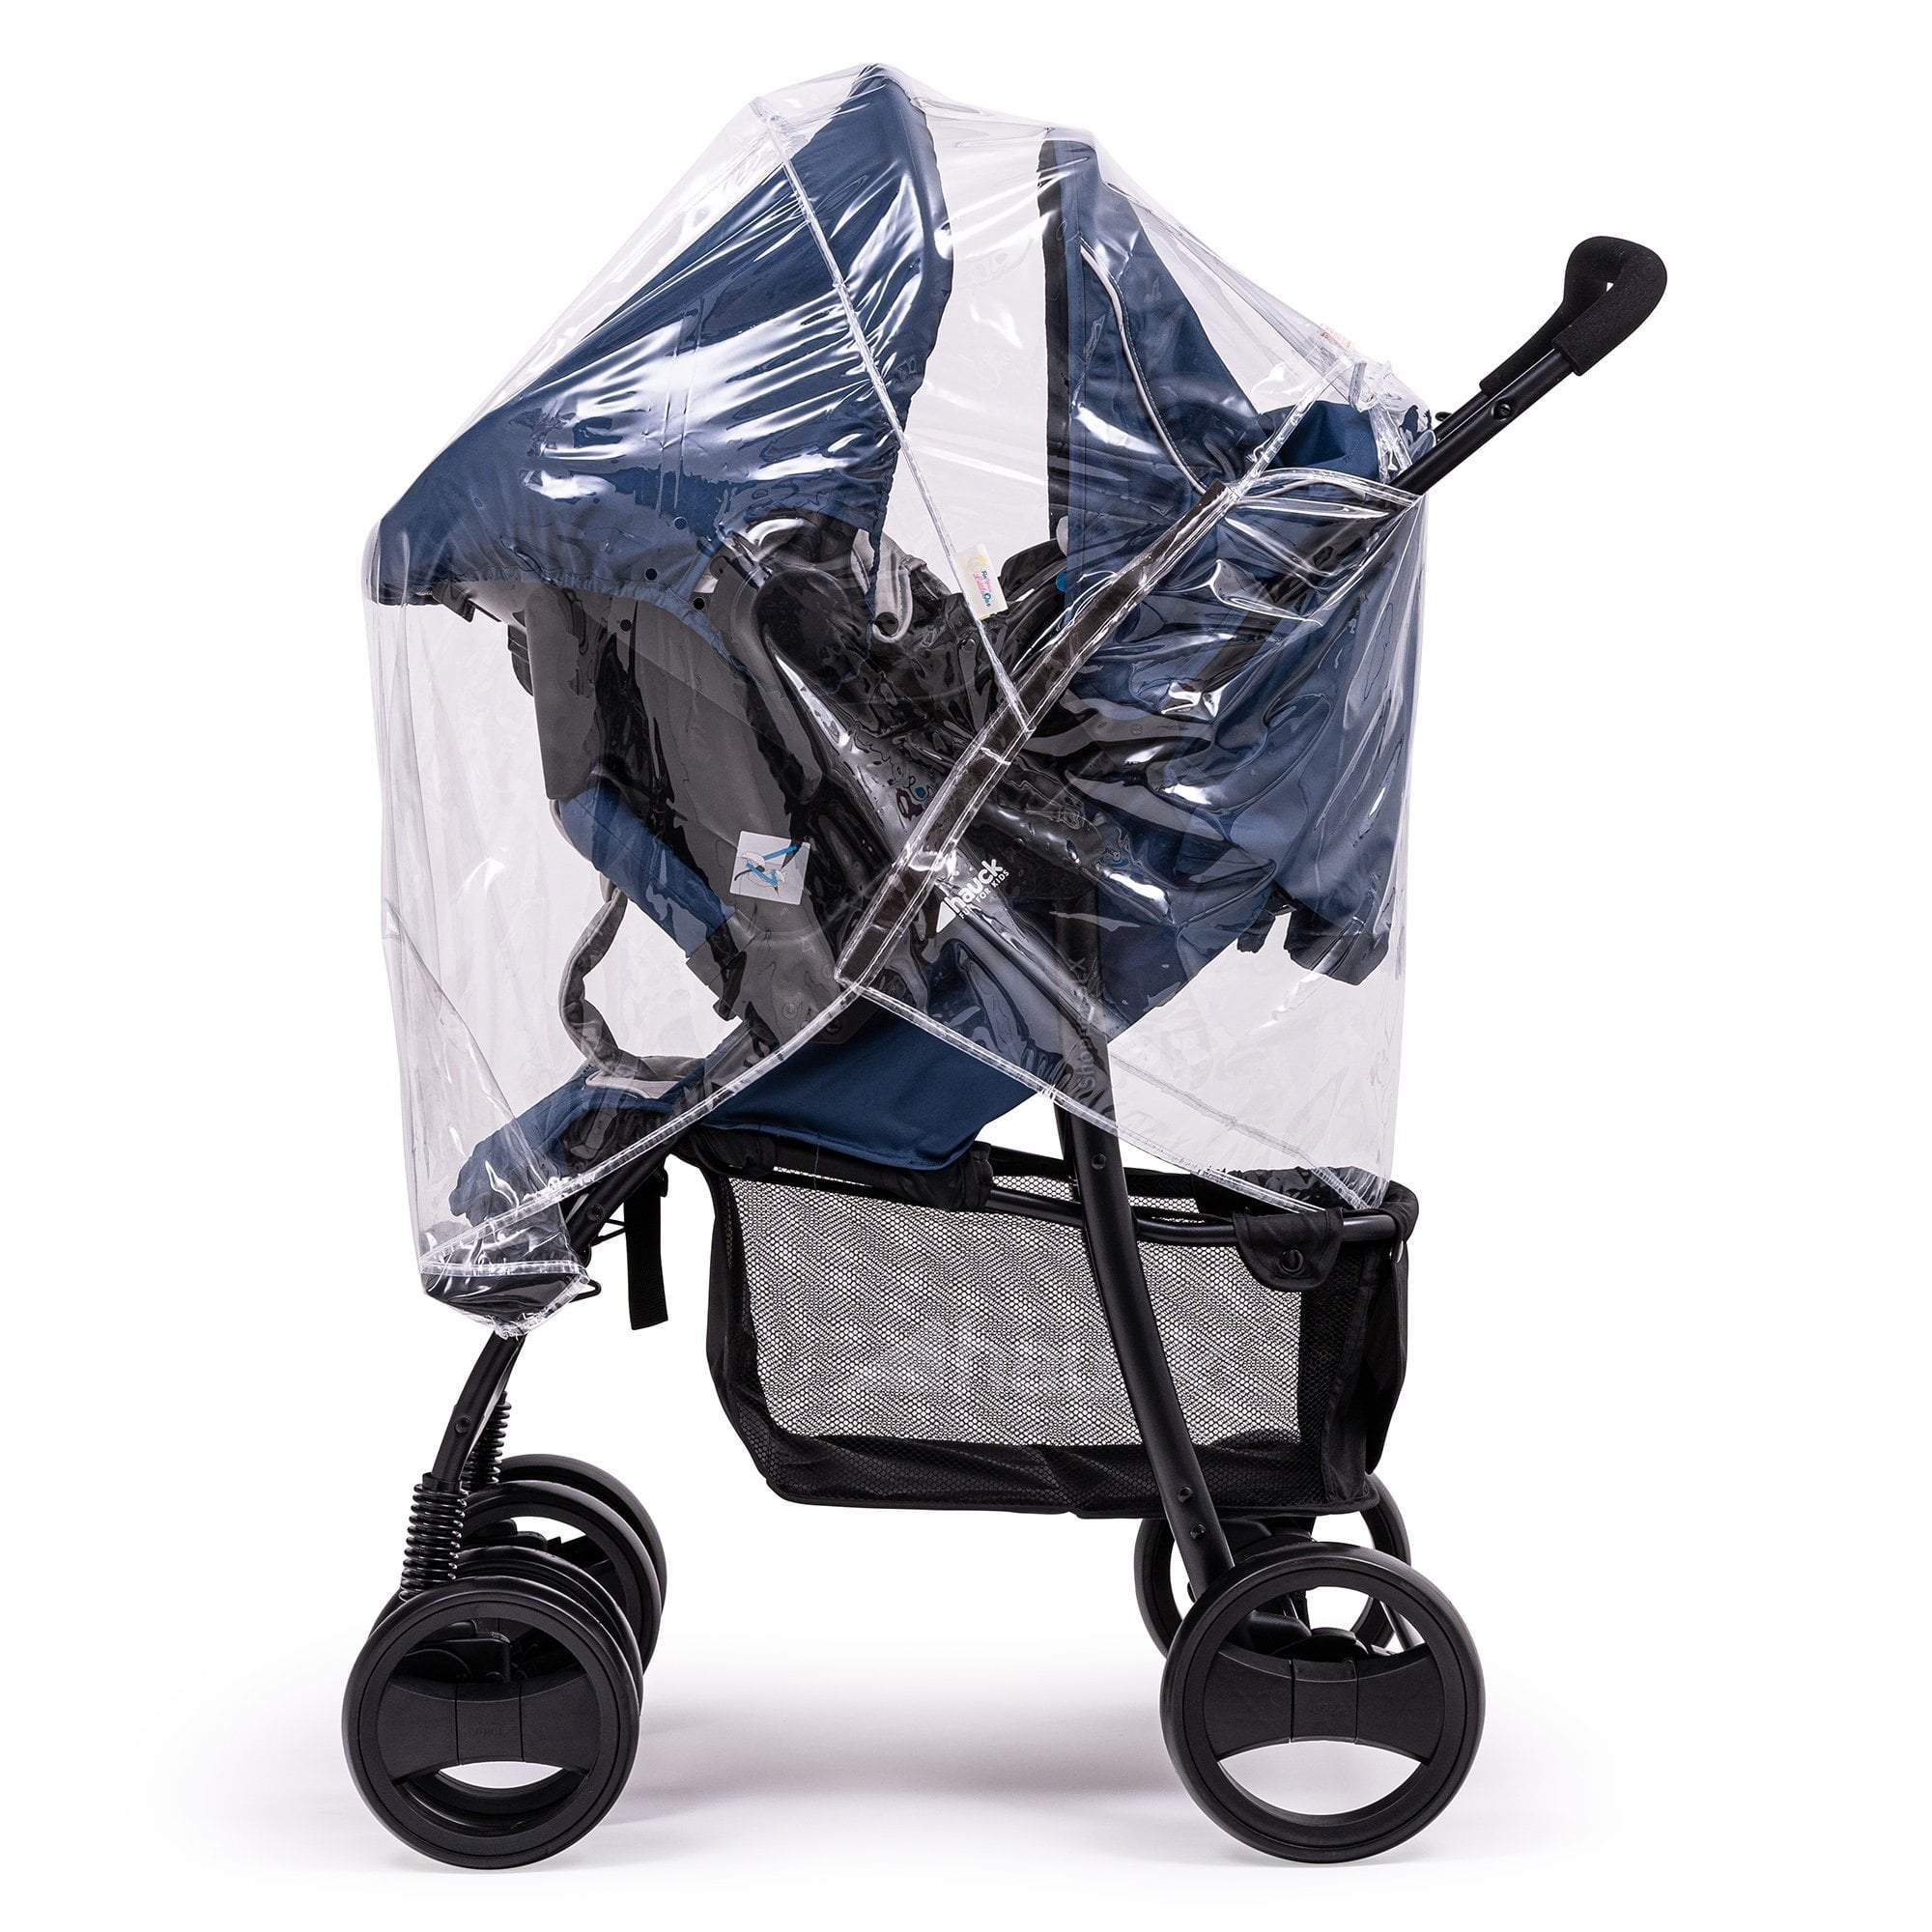 Travel System Raincover Compatible with Uppababy - Fits All Models - For Your Little One